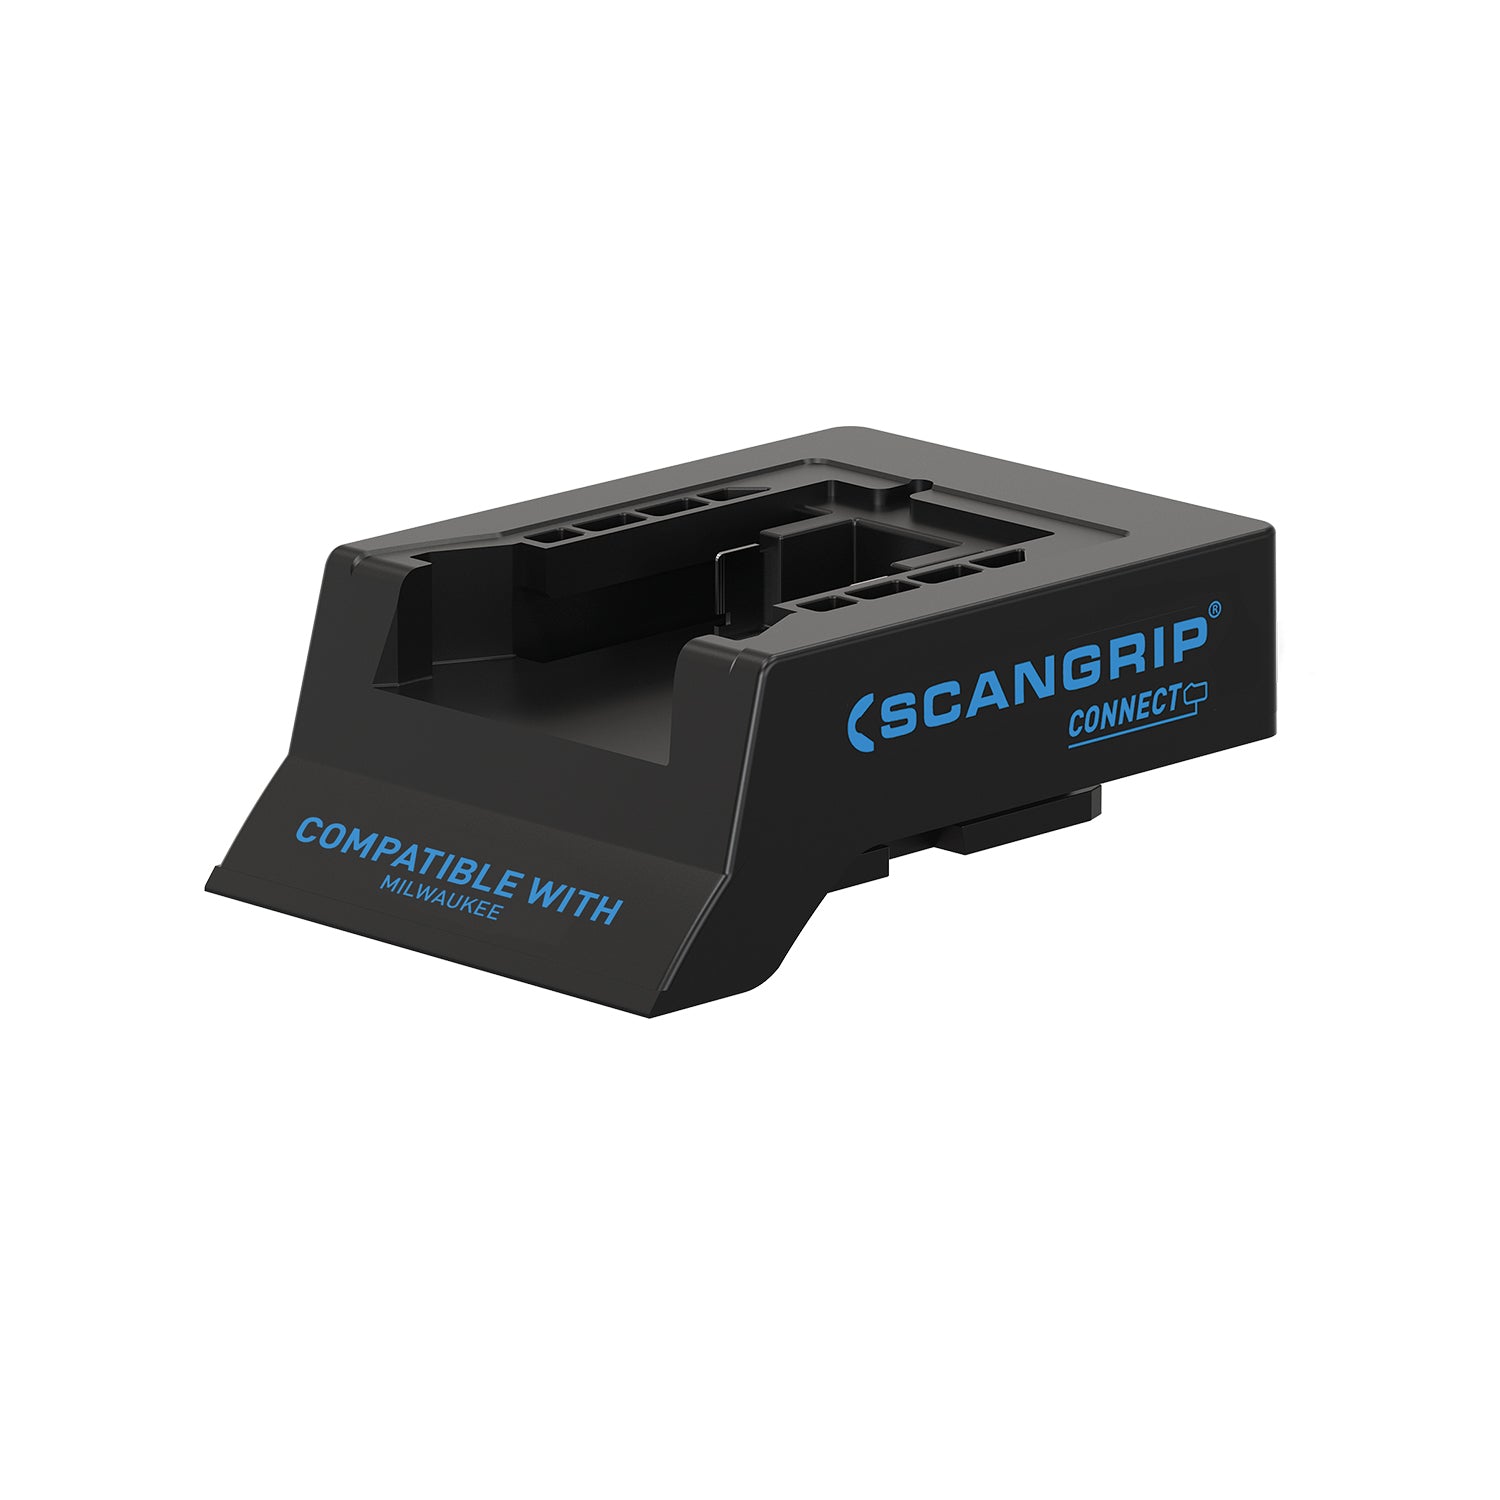 Scangrip Smart Connector With Battery Safety System